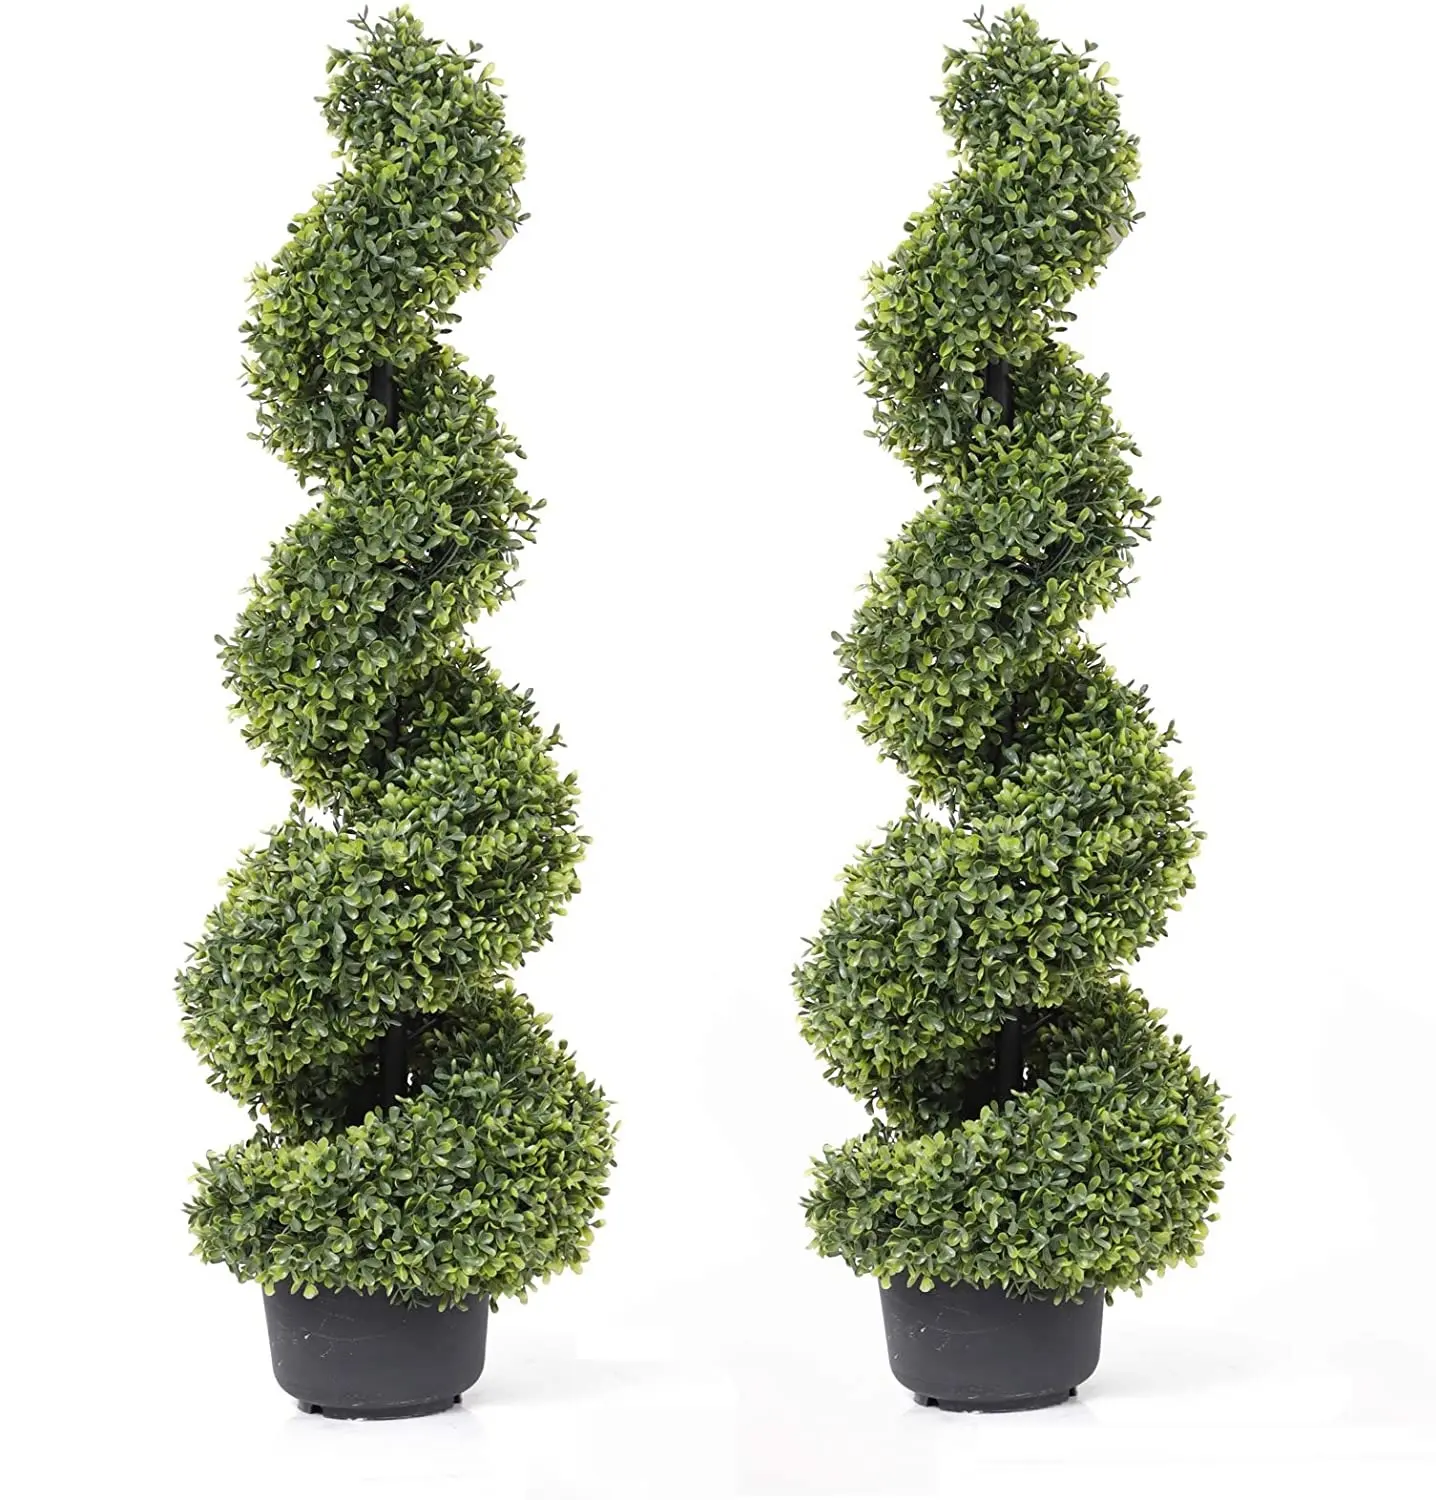 Faux Plant Artificial Plants Bonsai Boxwood Topiary Spiral Tree for Home and Outdoor Decoration